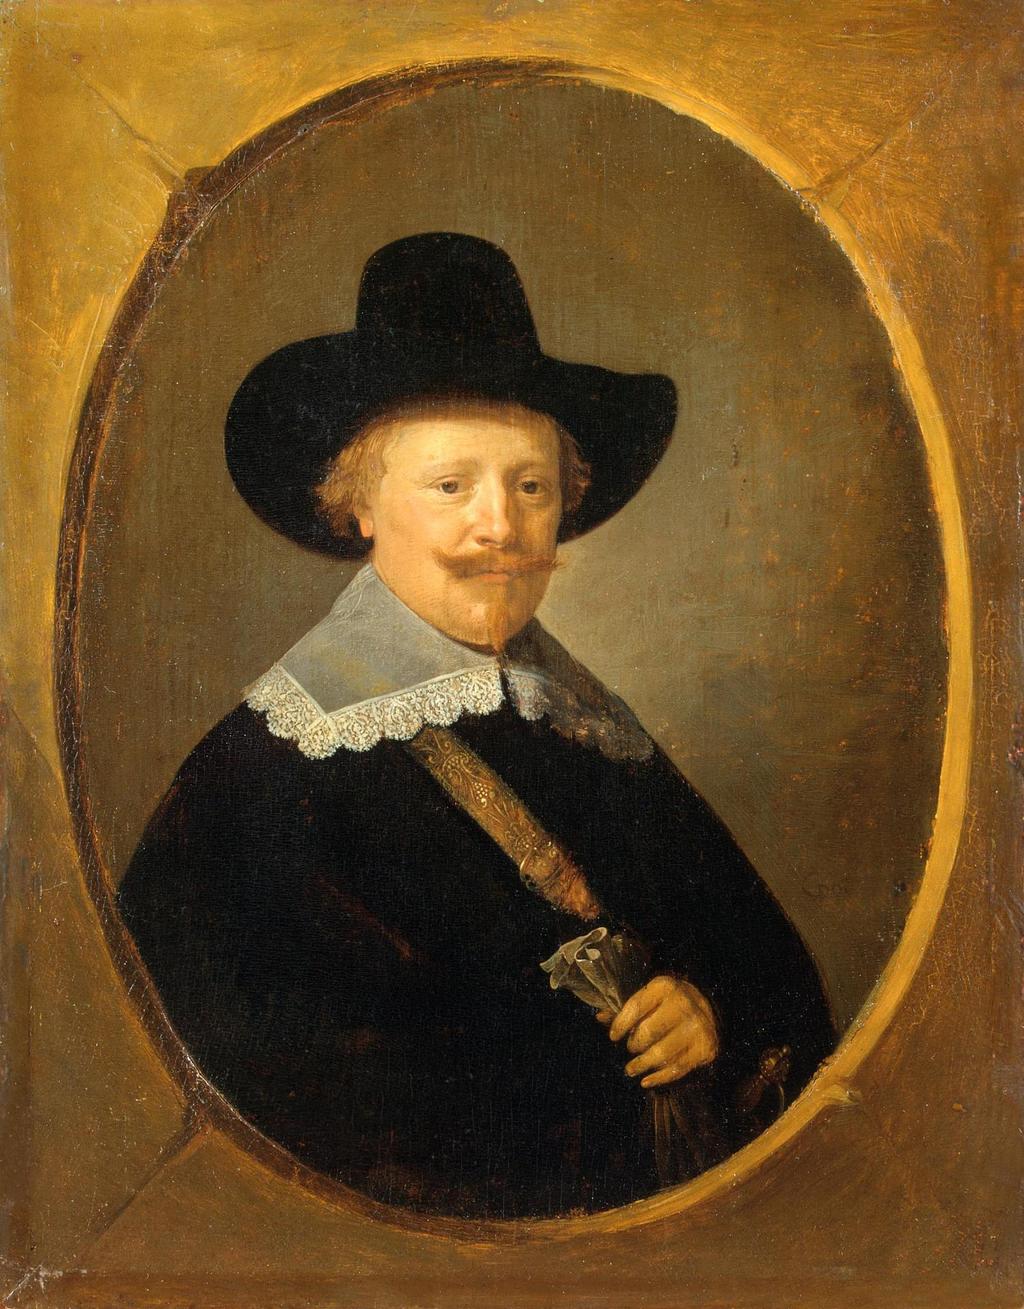 Page 4 of 8 mid-1640s is the similar, broad linen collar worn by a man in a securely dated portrait of 1646, Dou s Portrait of Johan Wittert van der Aa in the Rijksmuseum.